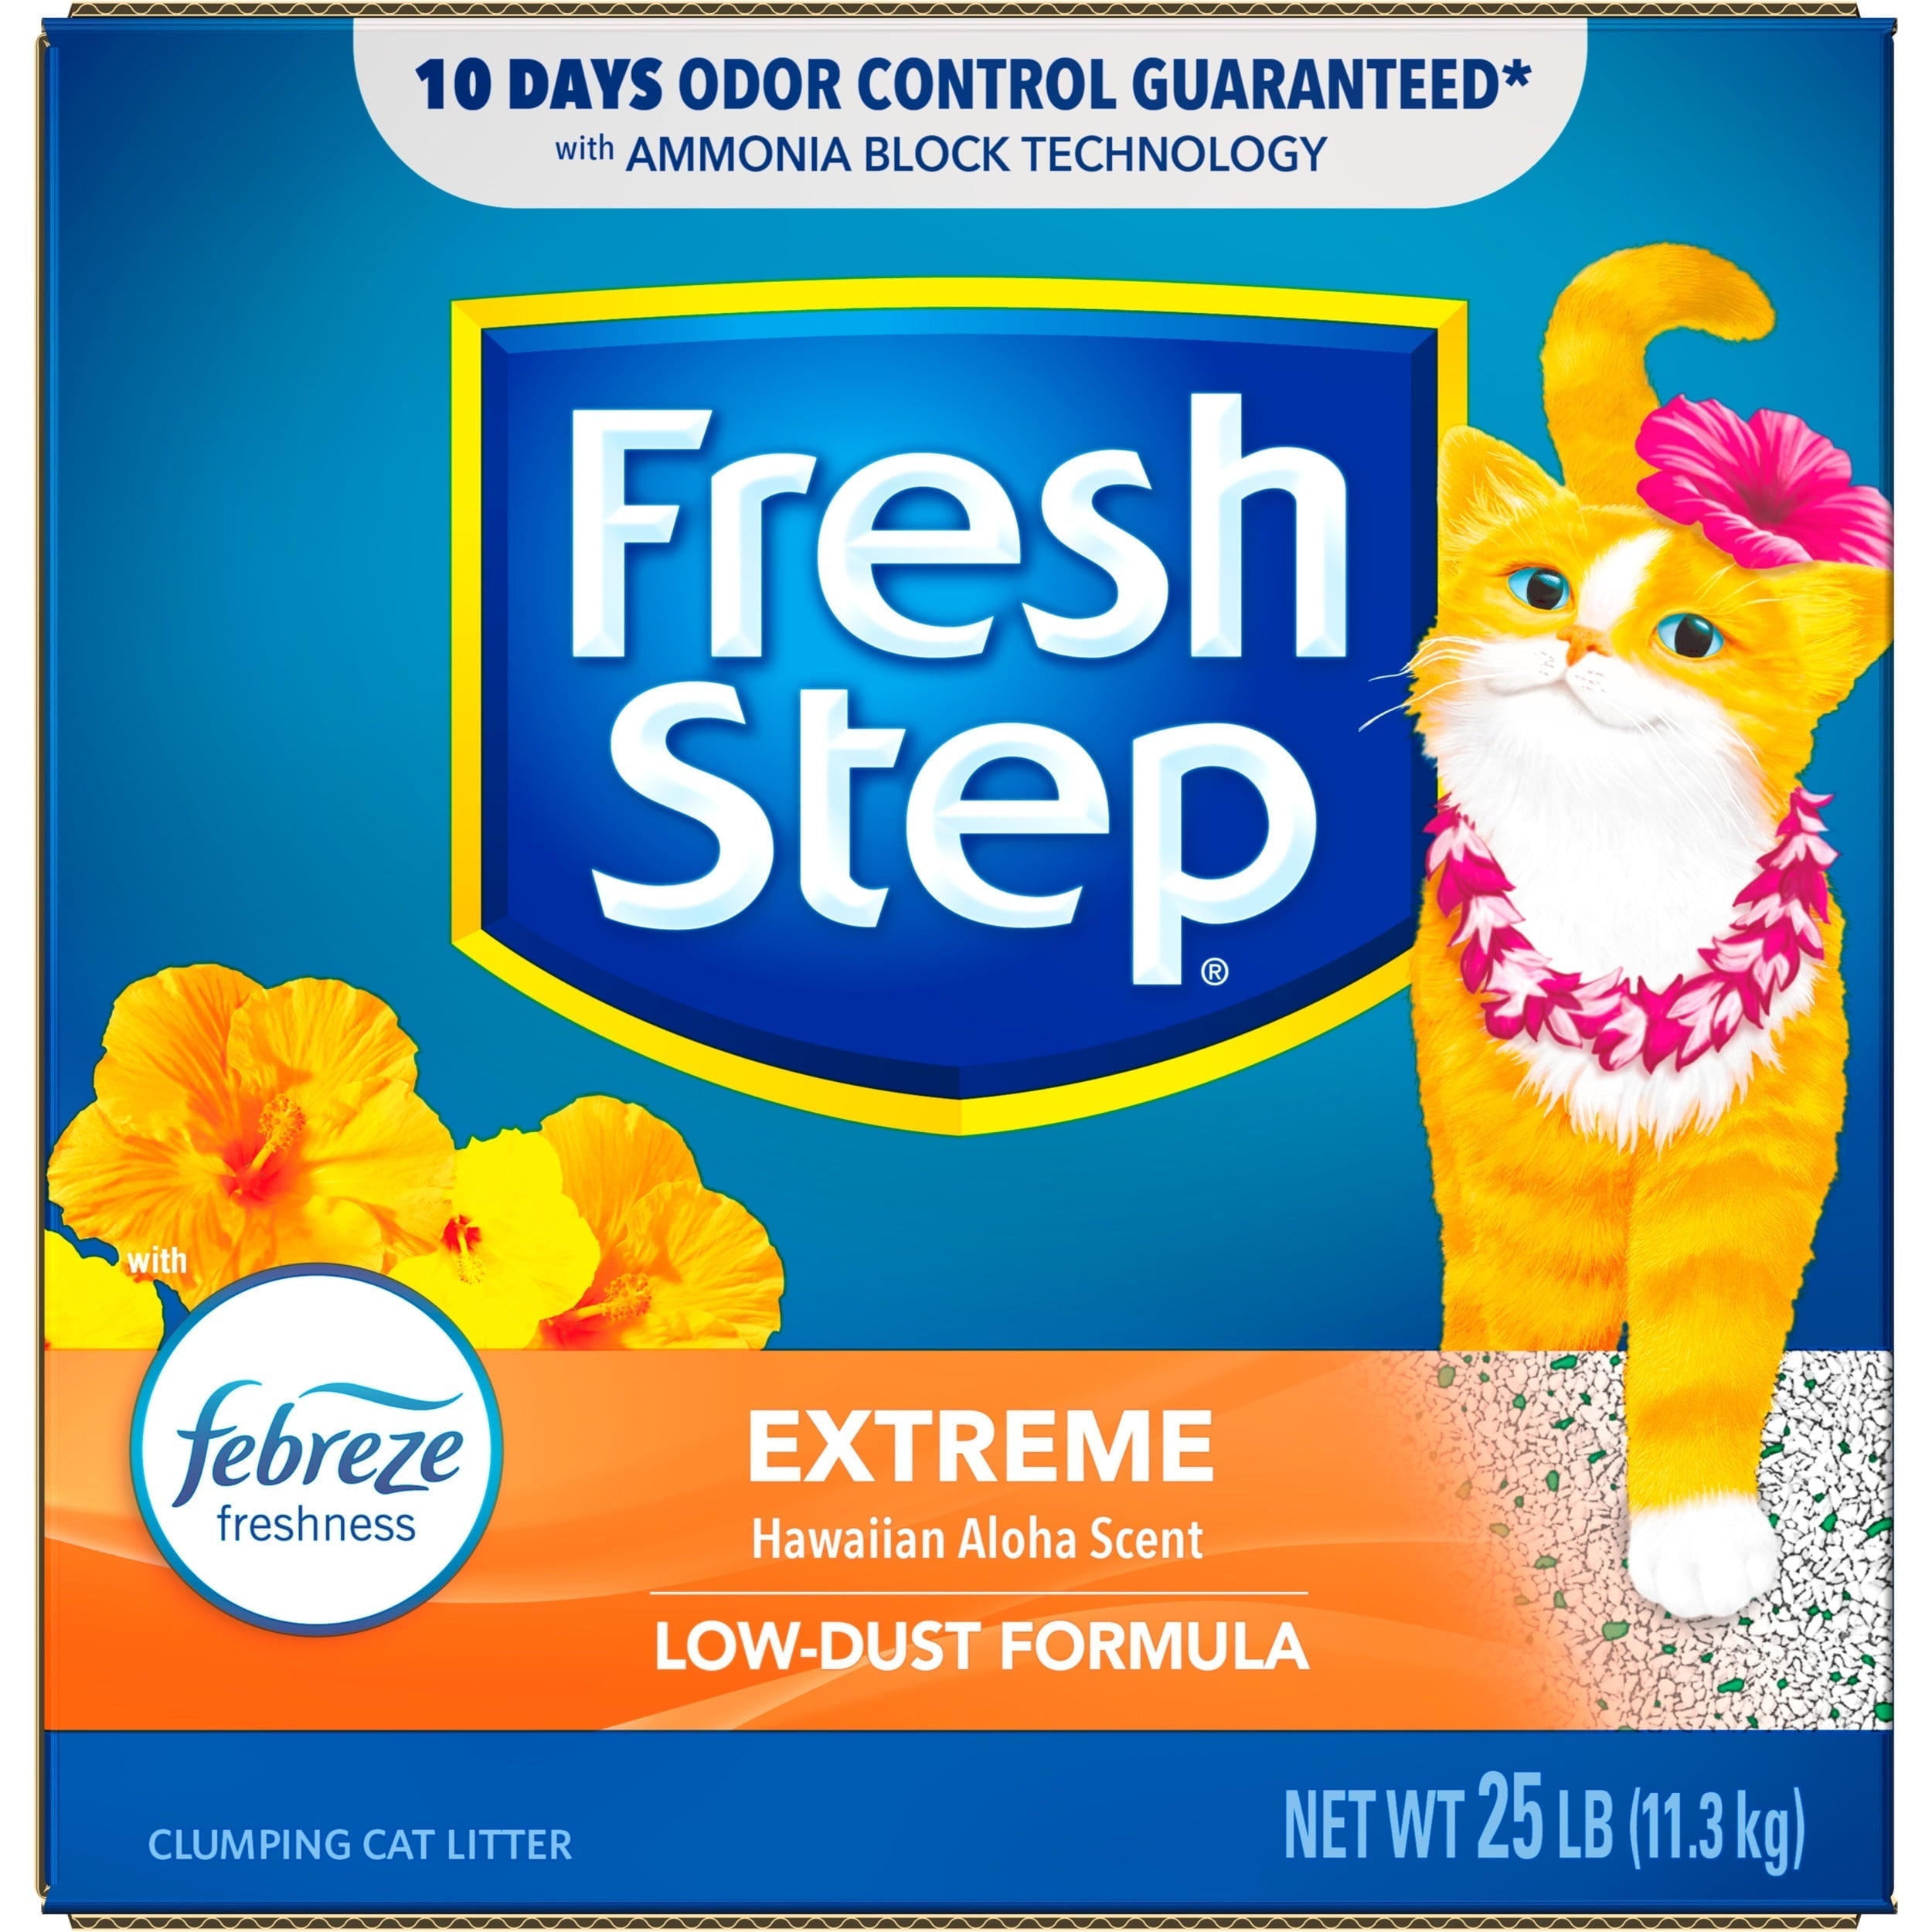 Wholesale prices with free shipping all over United States Fresh Step Scented Litter with the Power of Febreze, Clumping Cat Litter - Hawaiian Aloha, 25 lbs - Steven Deals